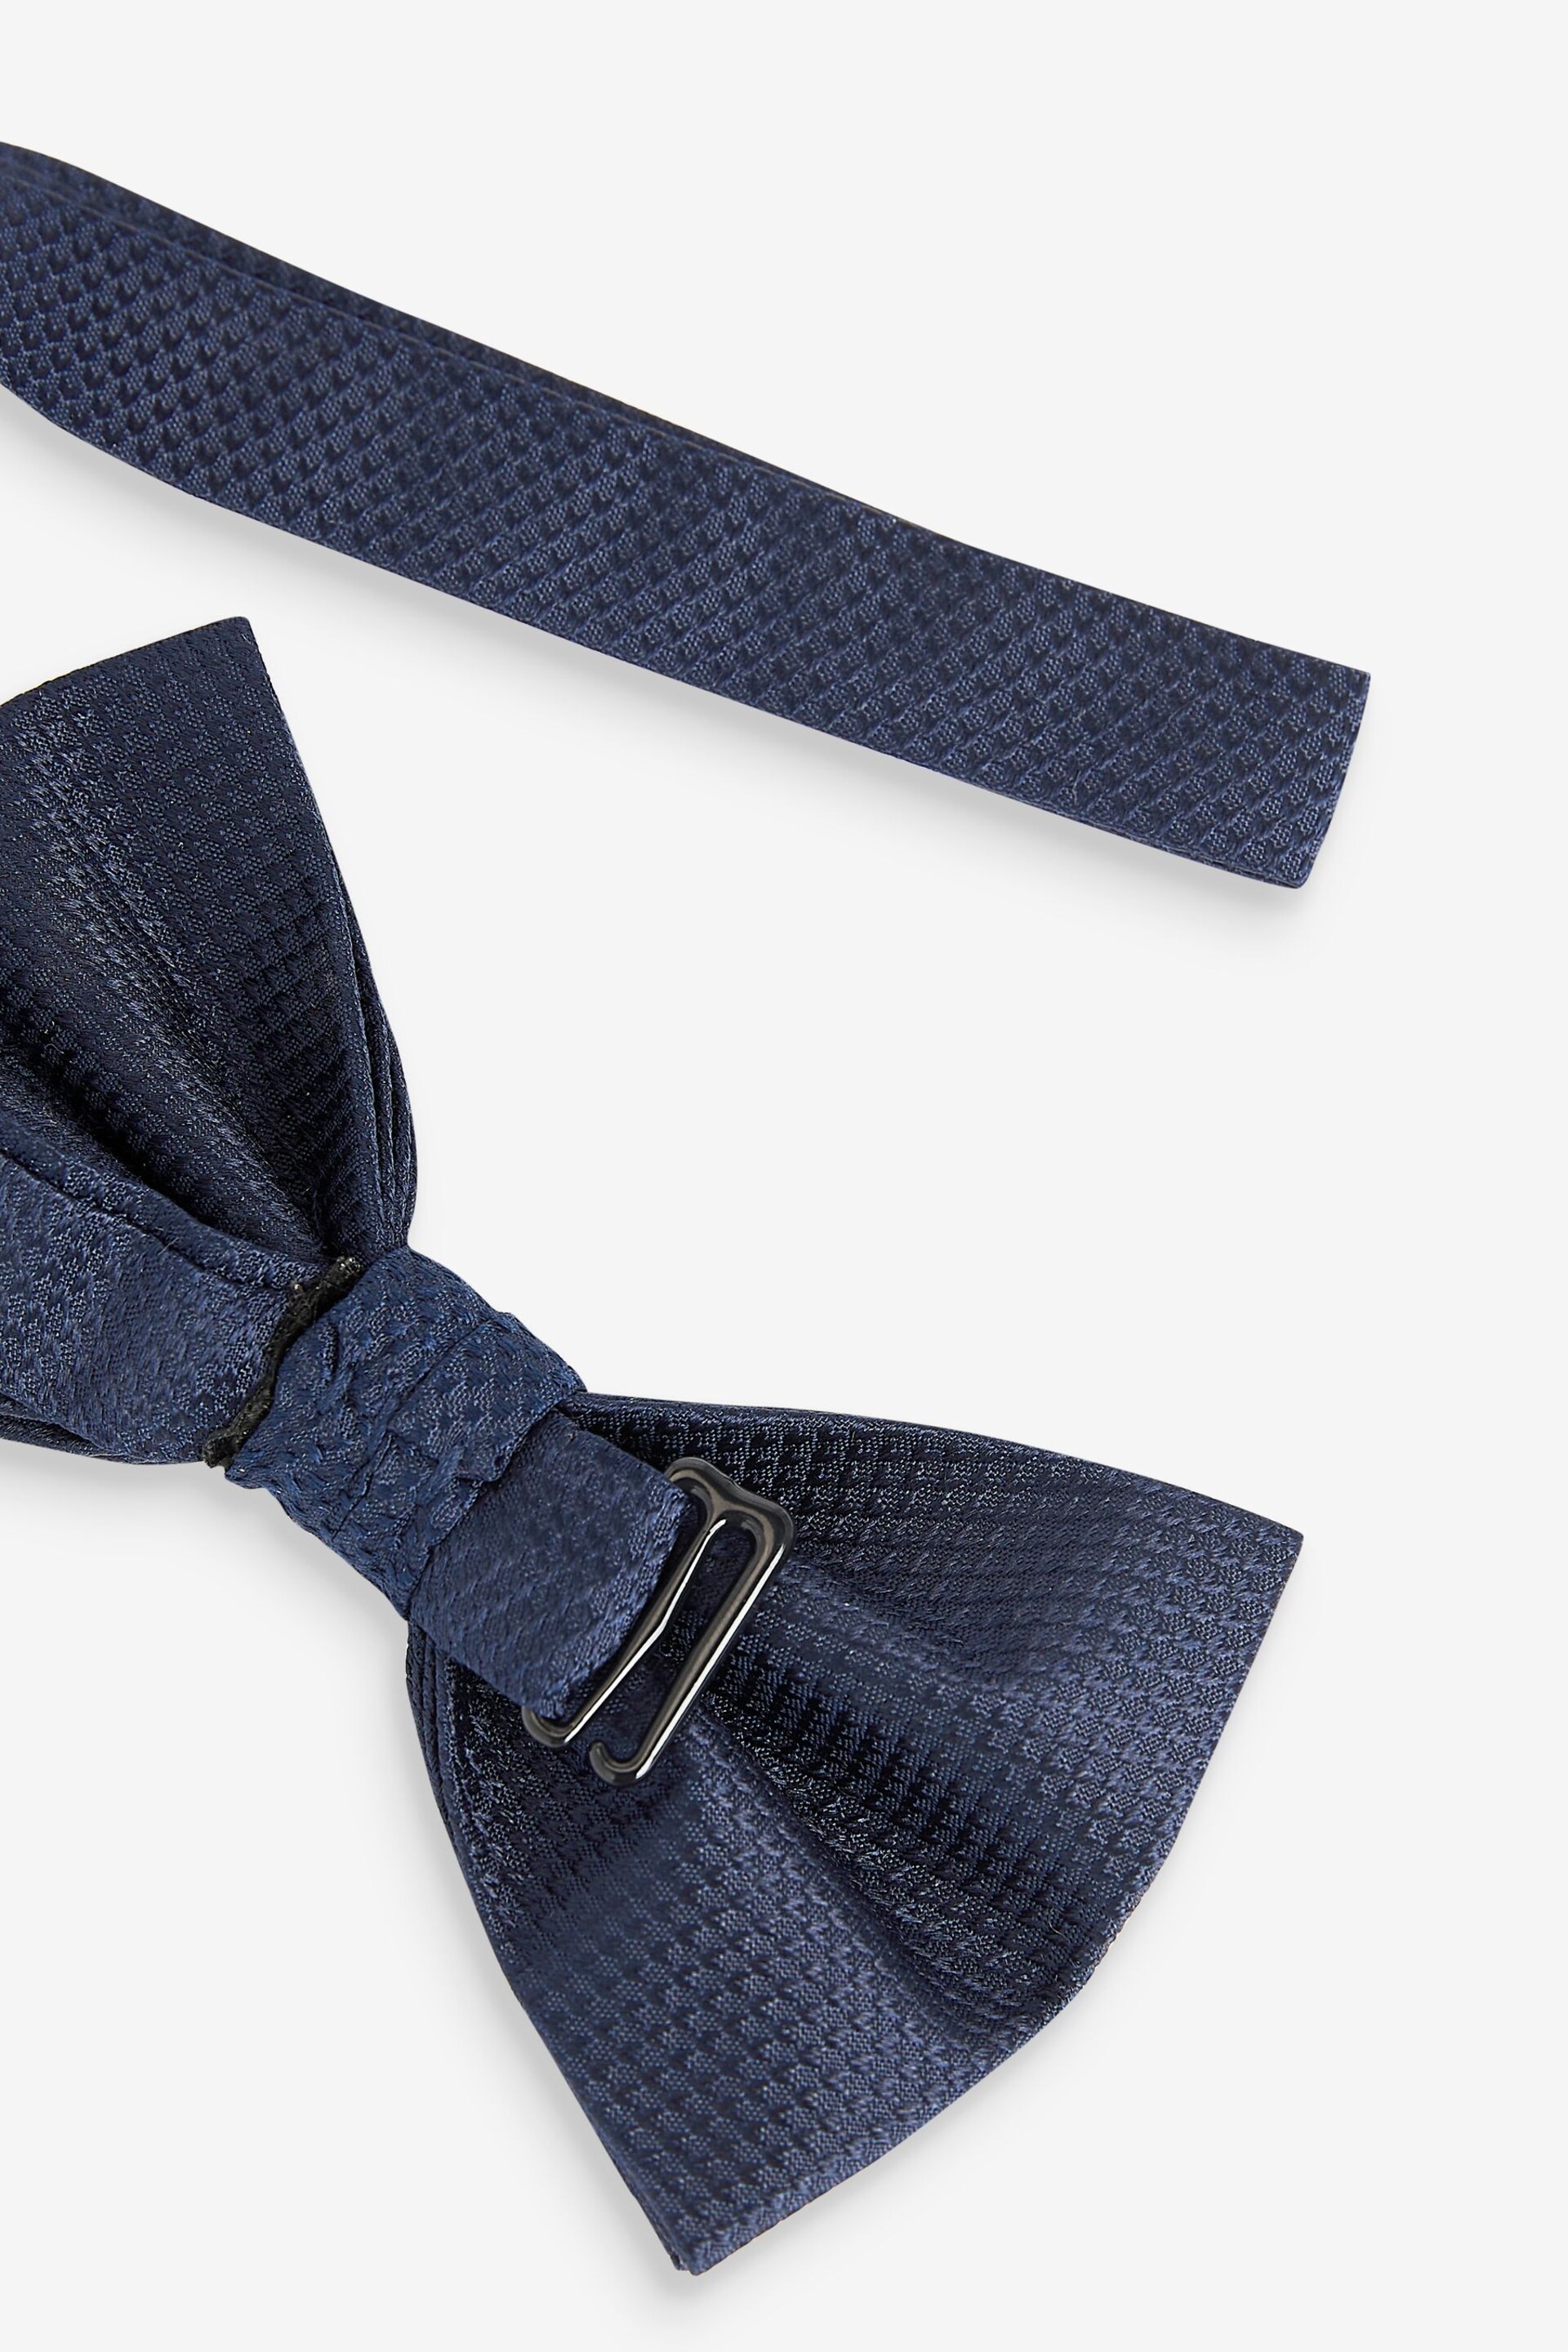 Navy Blue Textured Silk Bow Tie - Image 4 of 4